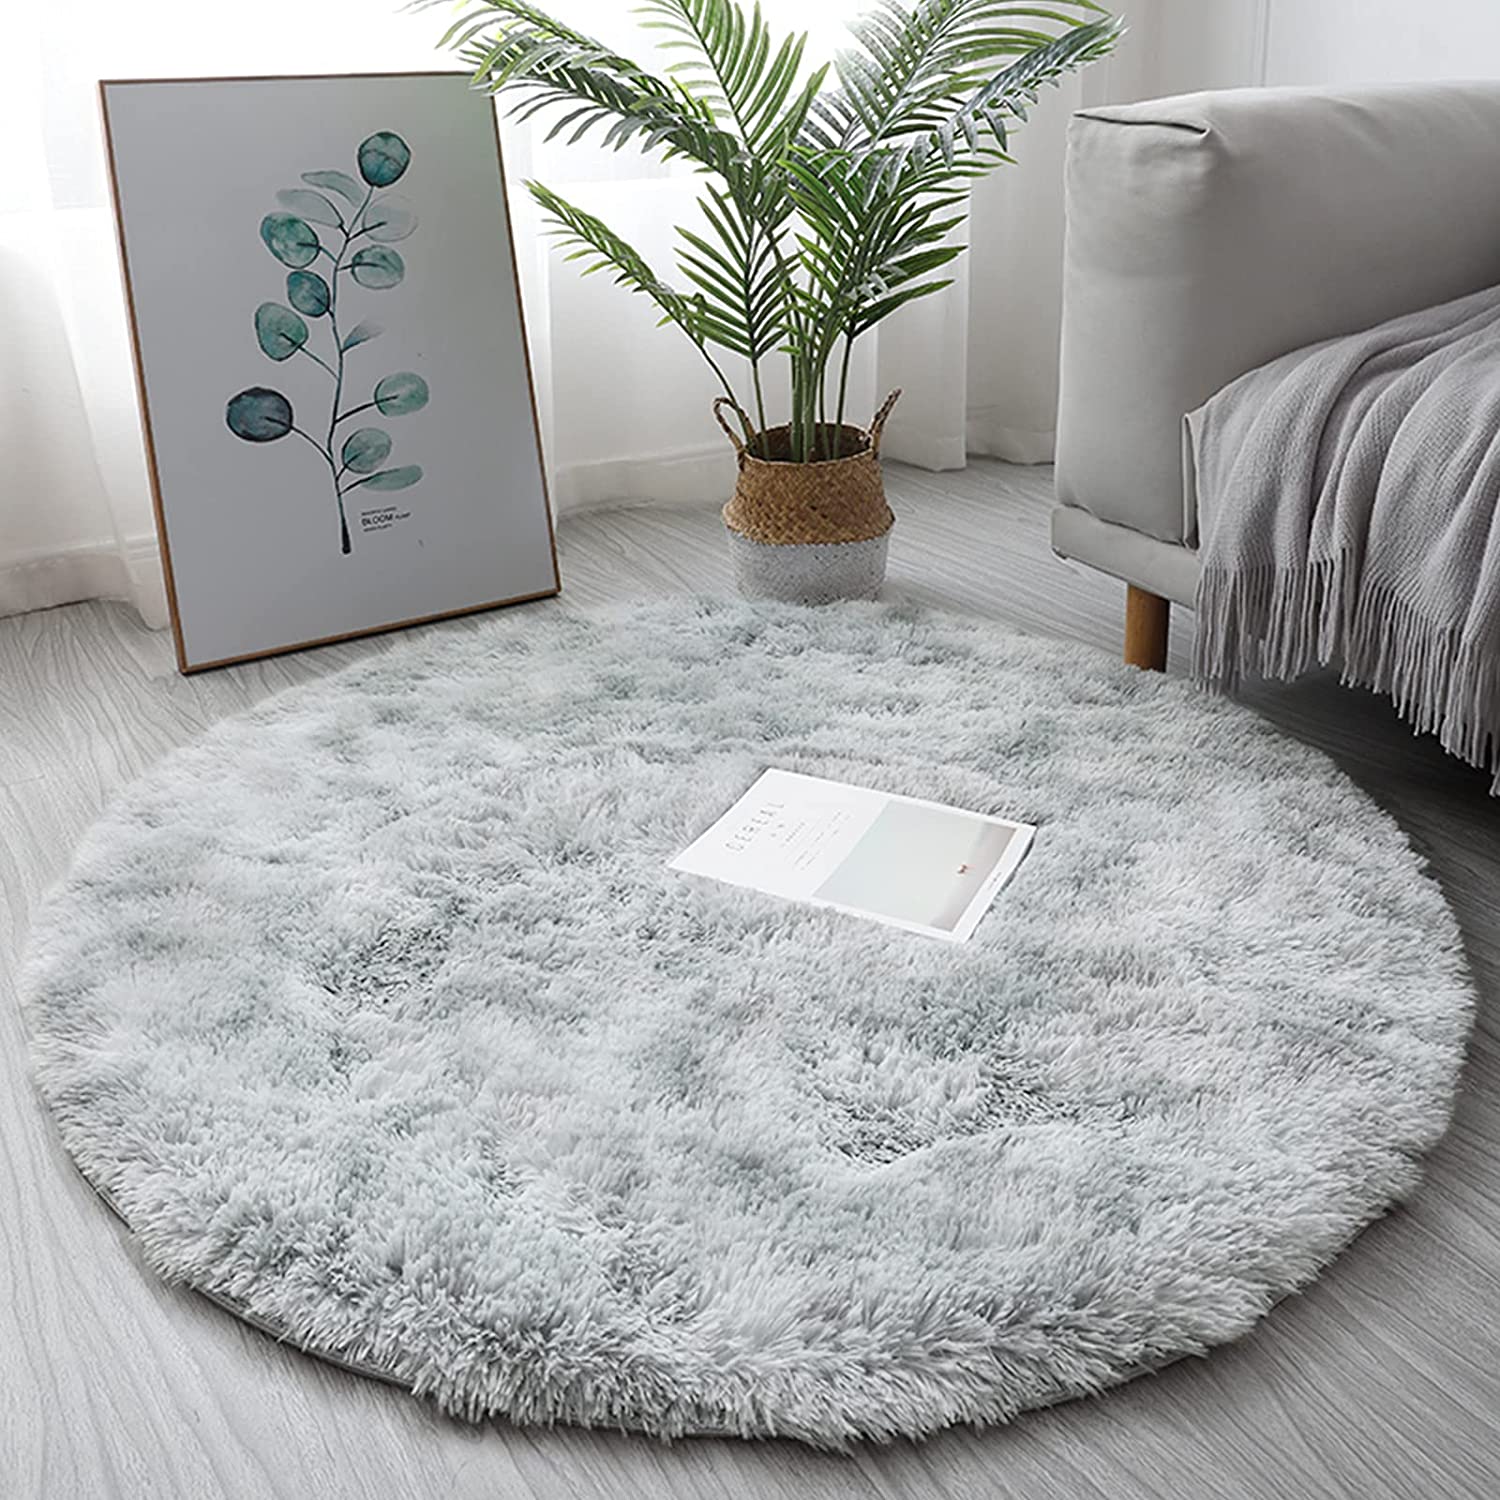 Bubble Kiss Thick Round Rug Carpets